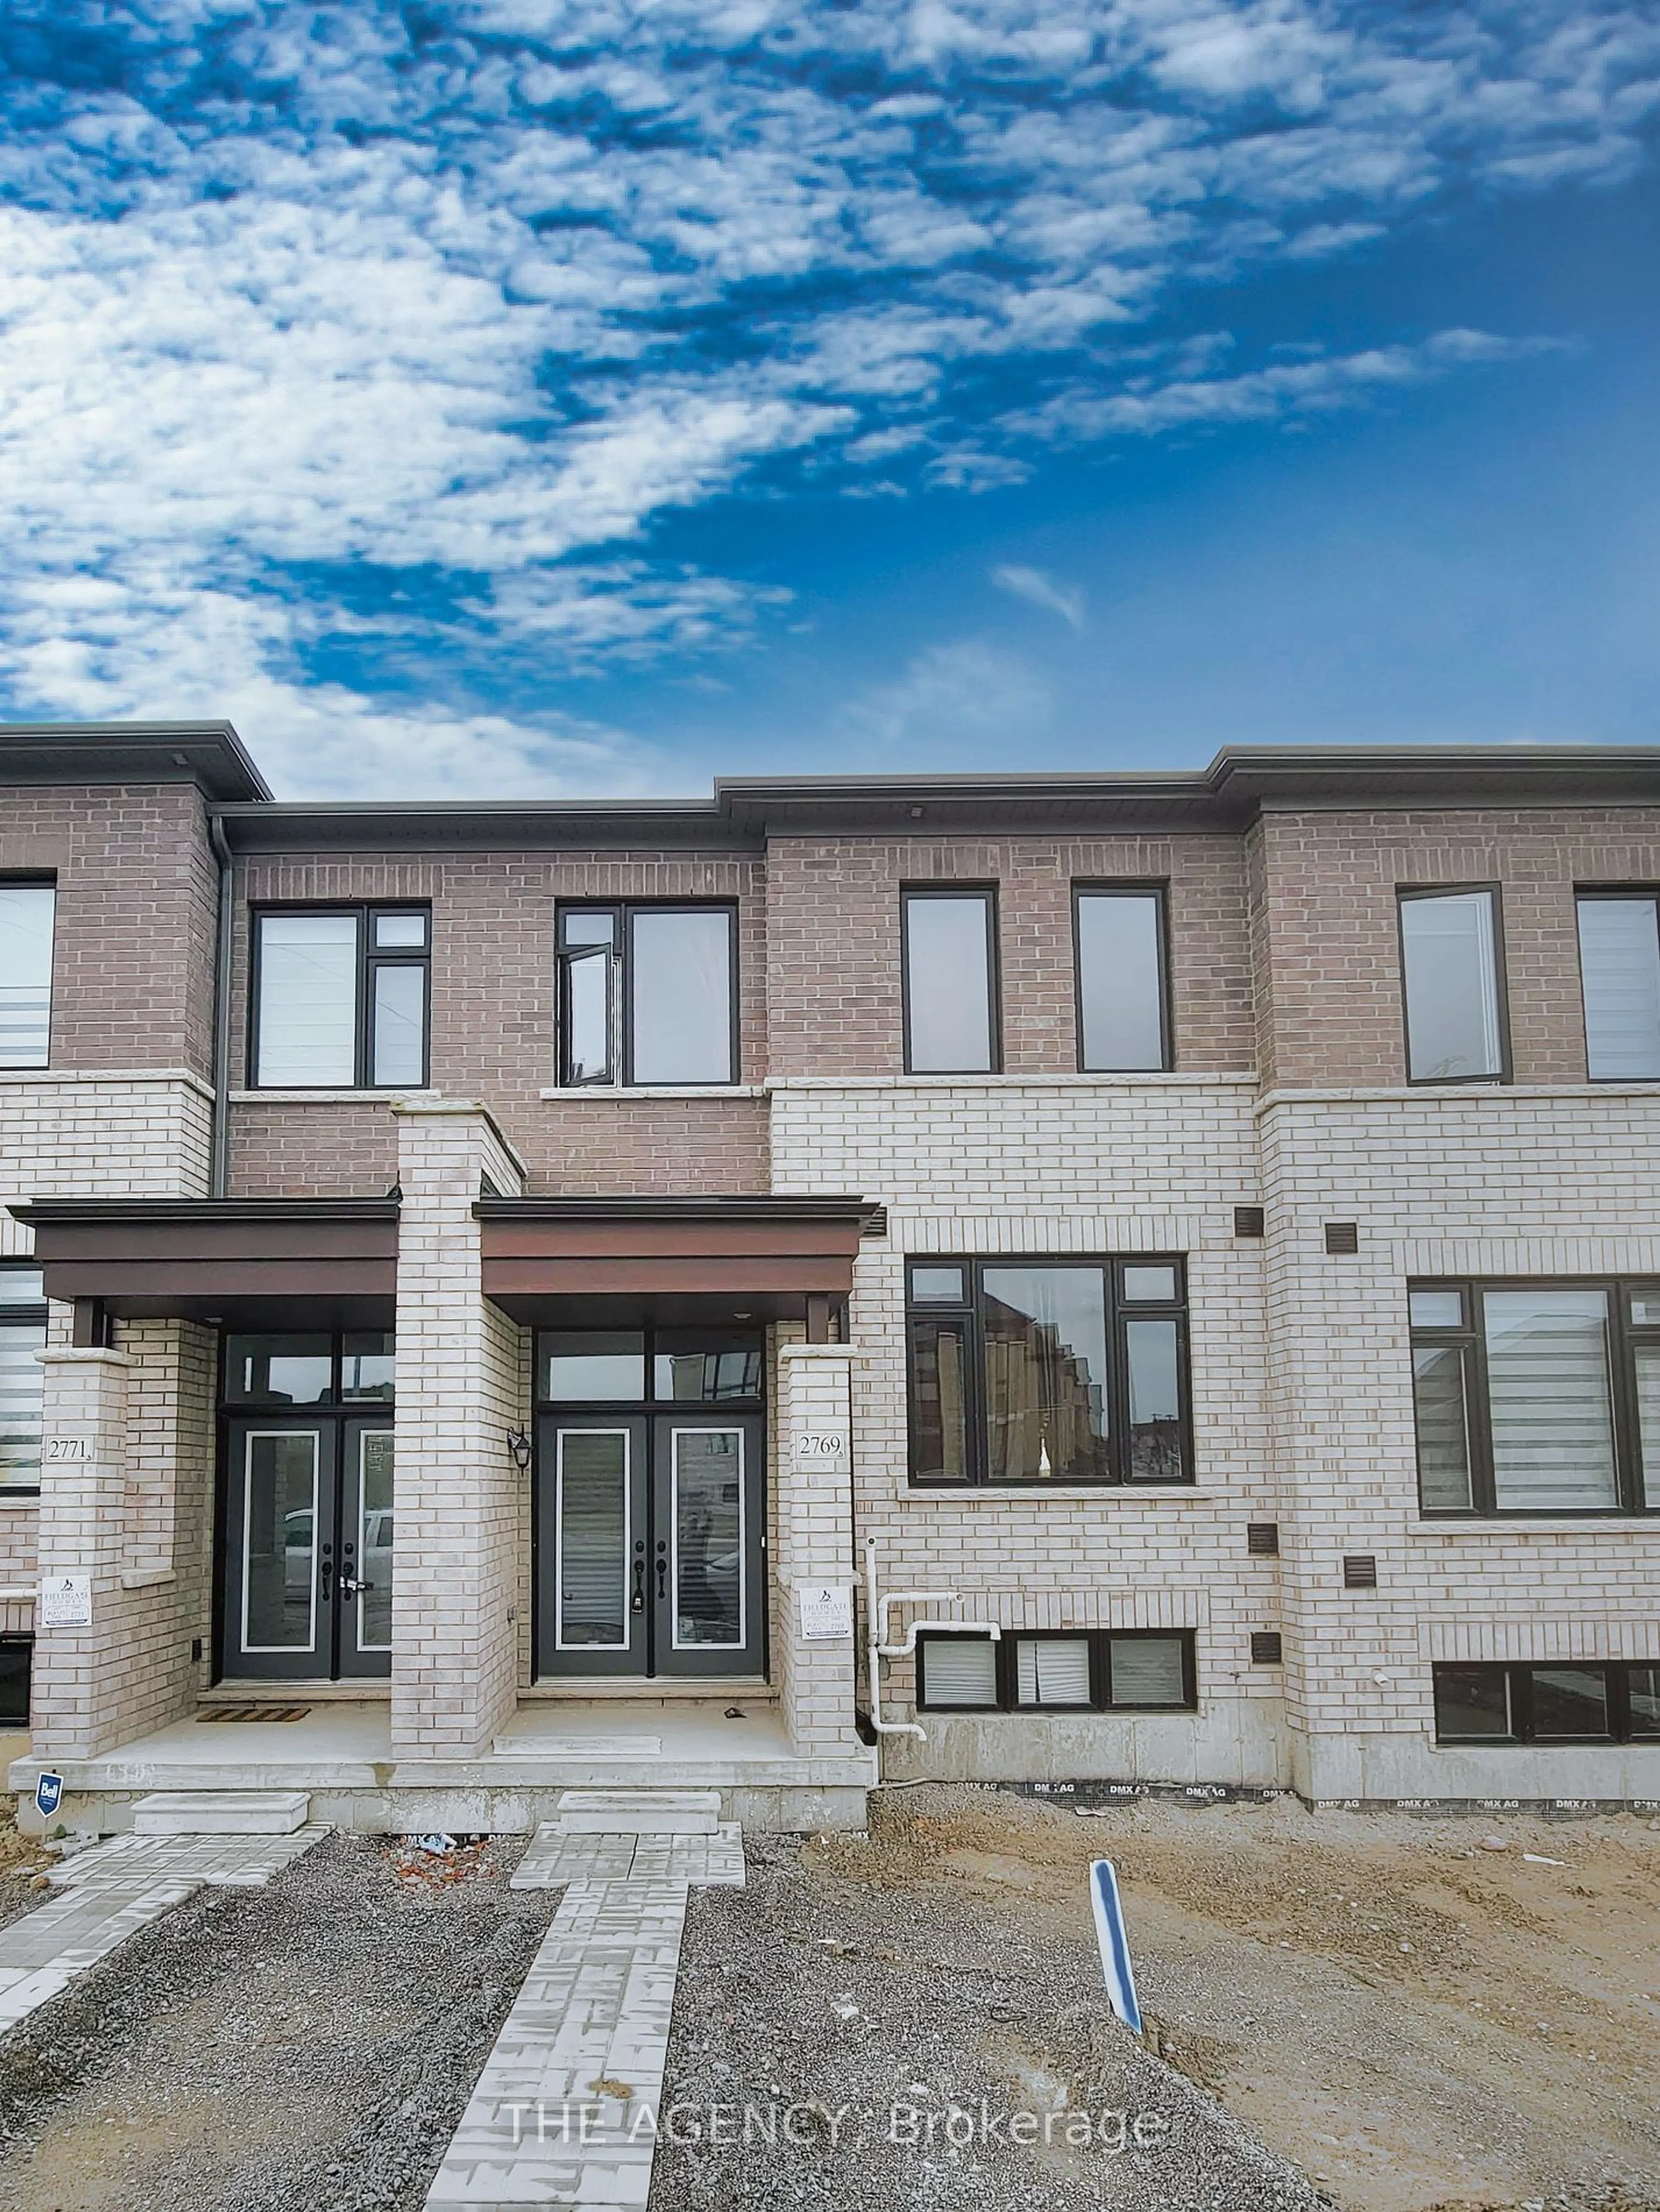 Home with brick exterior material for 2769 Peter Matthews Dr, Pickering Ontario L1X 2R2